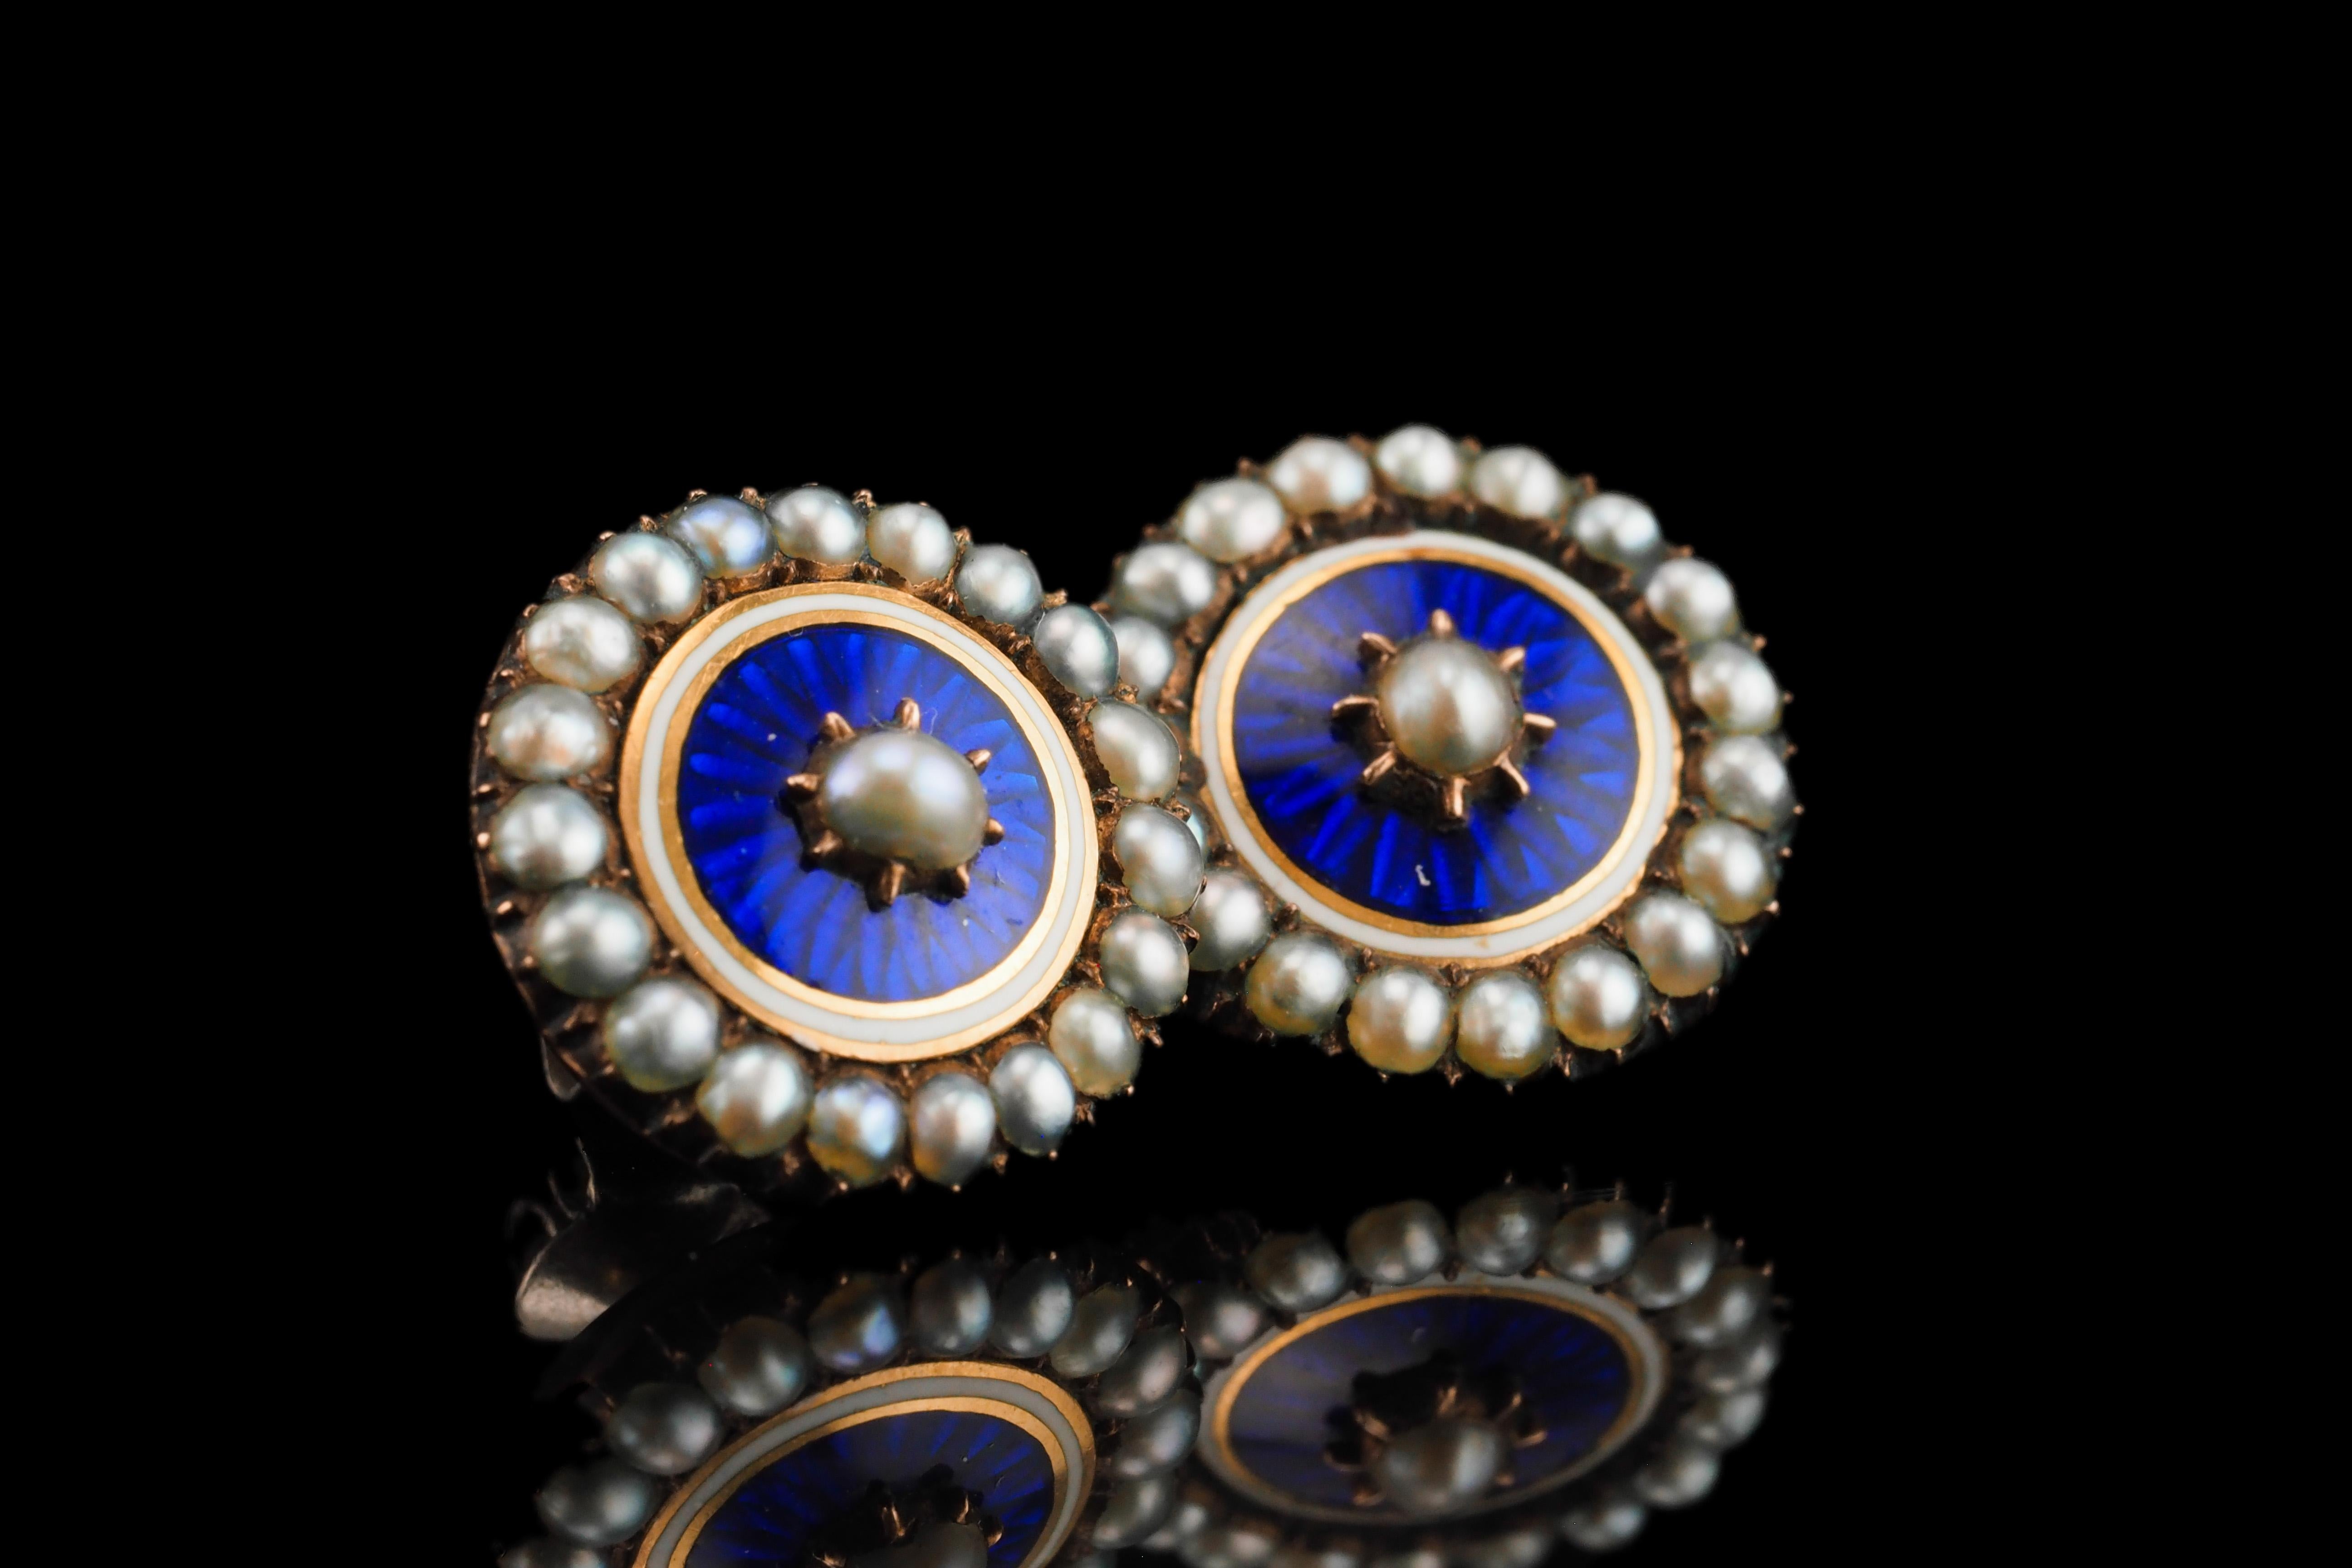 Antique Georgian Gold Earrings with Blue Enamel Guilloche Pearl Cluster c.1800 For Sale 6